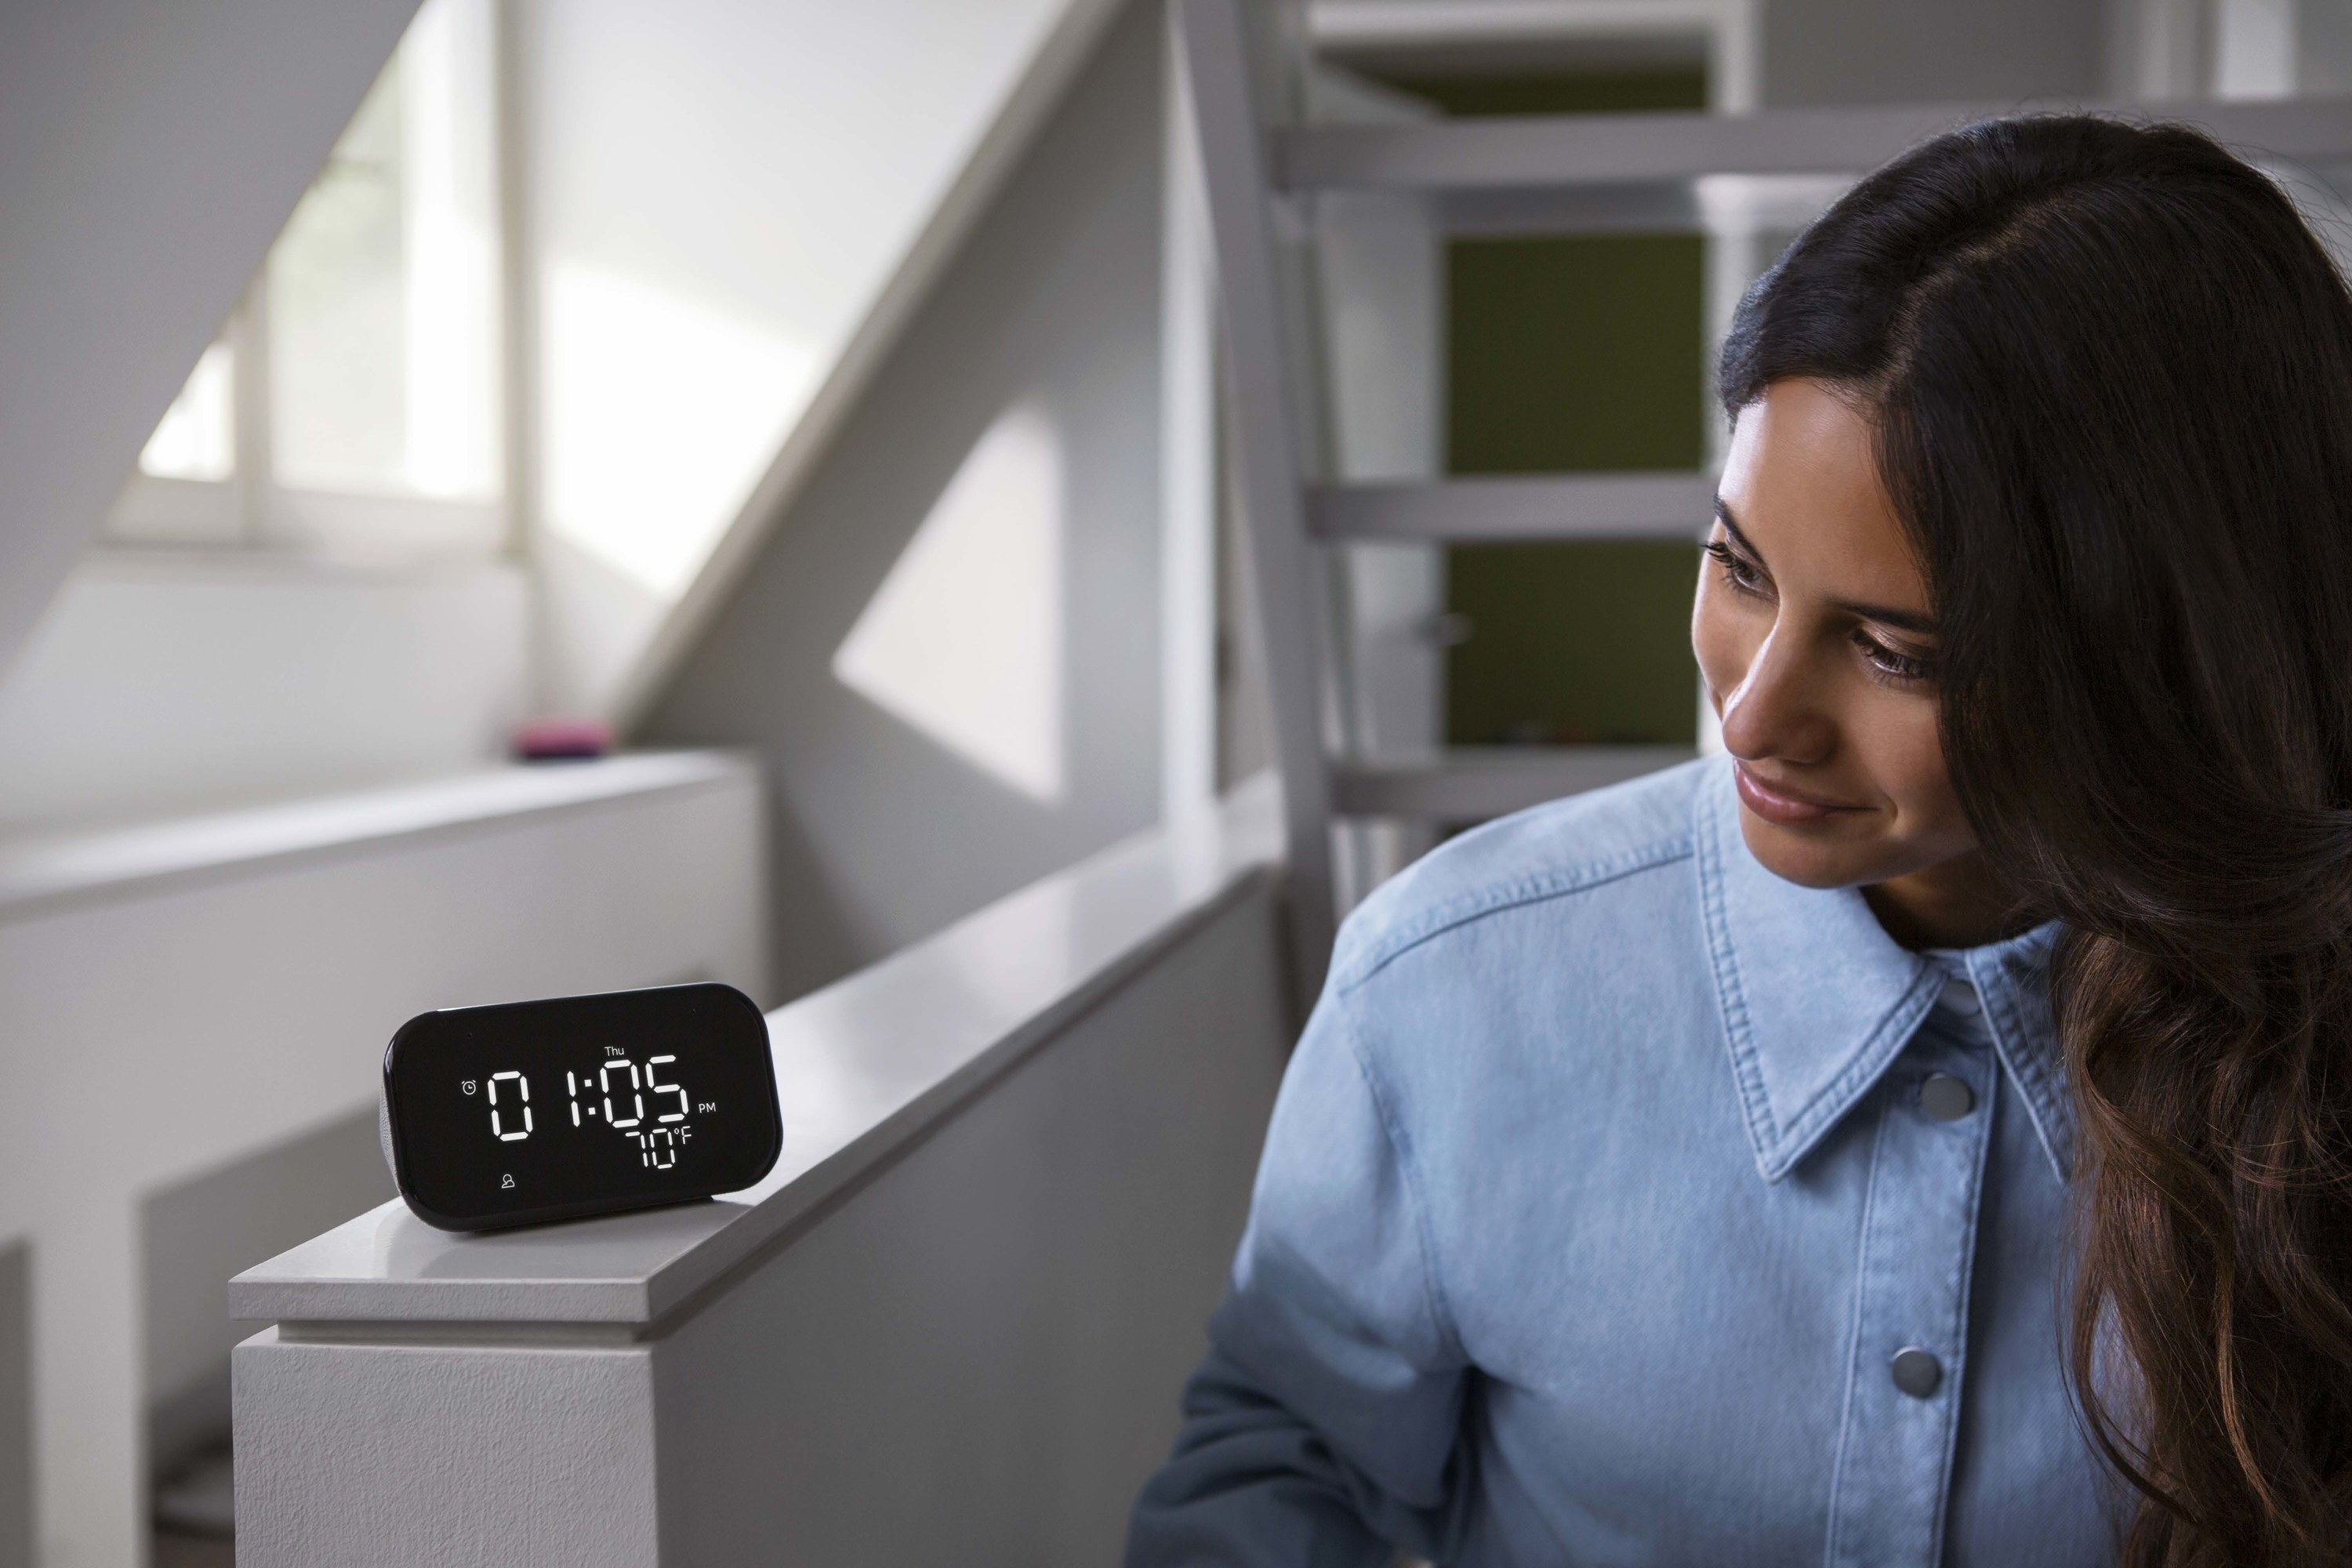 A model looking at the smart clock